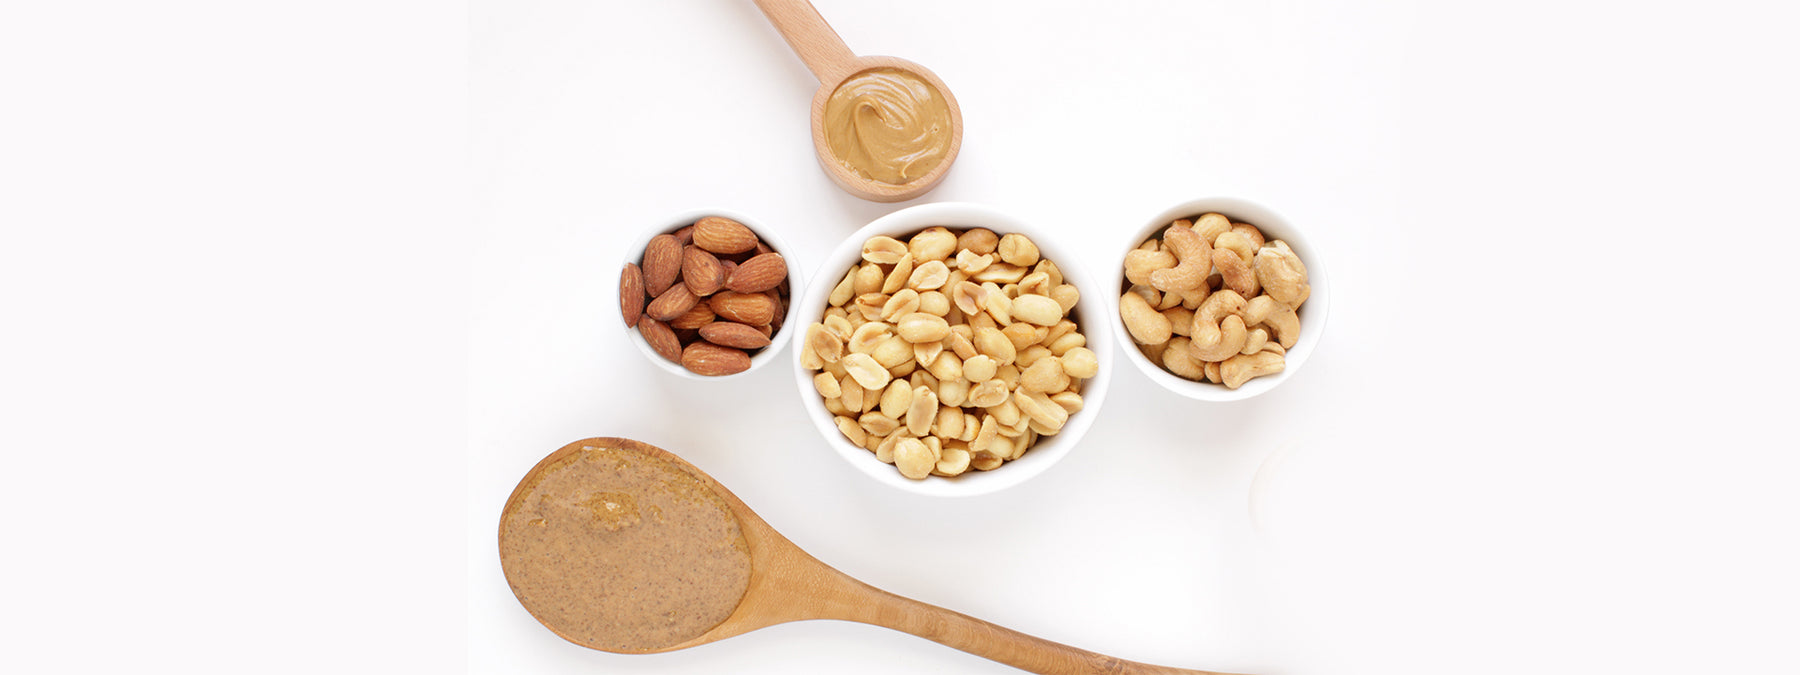 Nut Butter Bar Breakdown: Protein and Nutrition